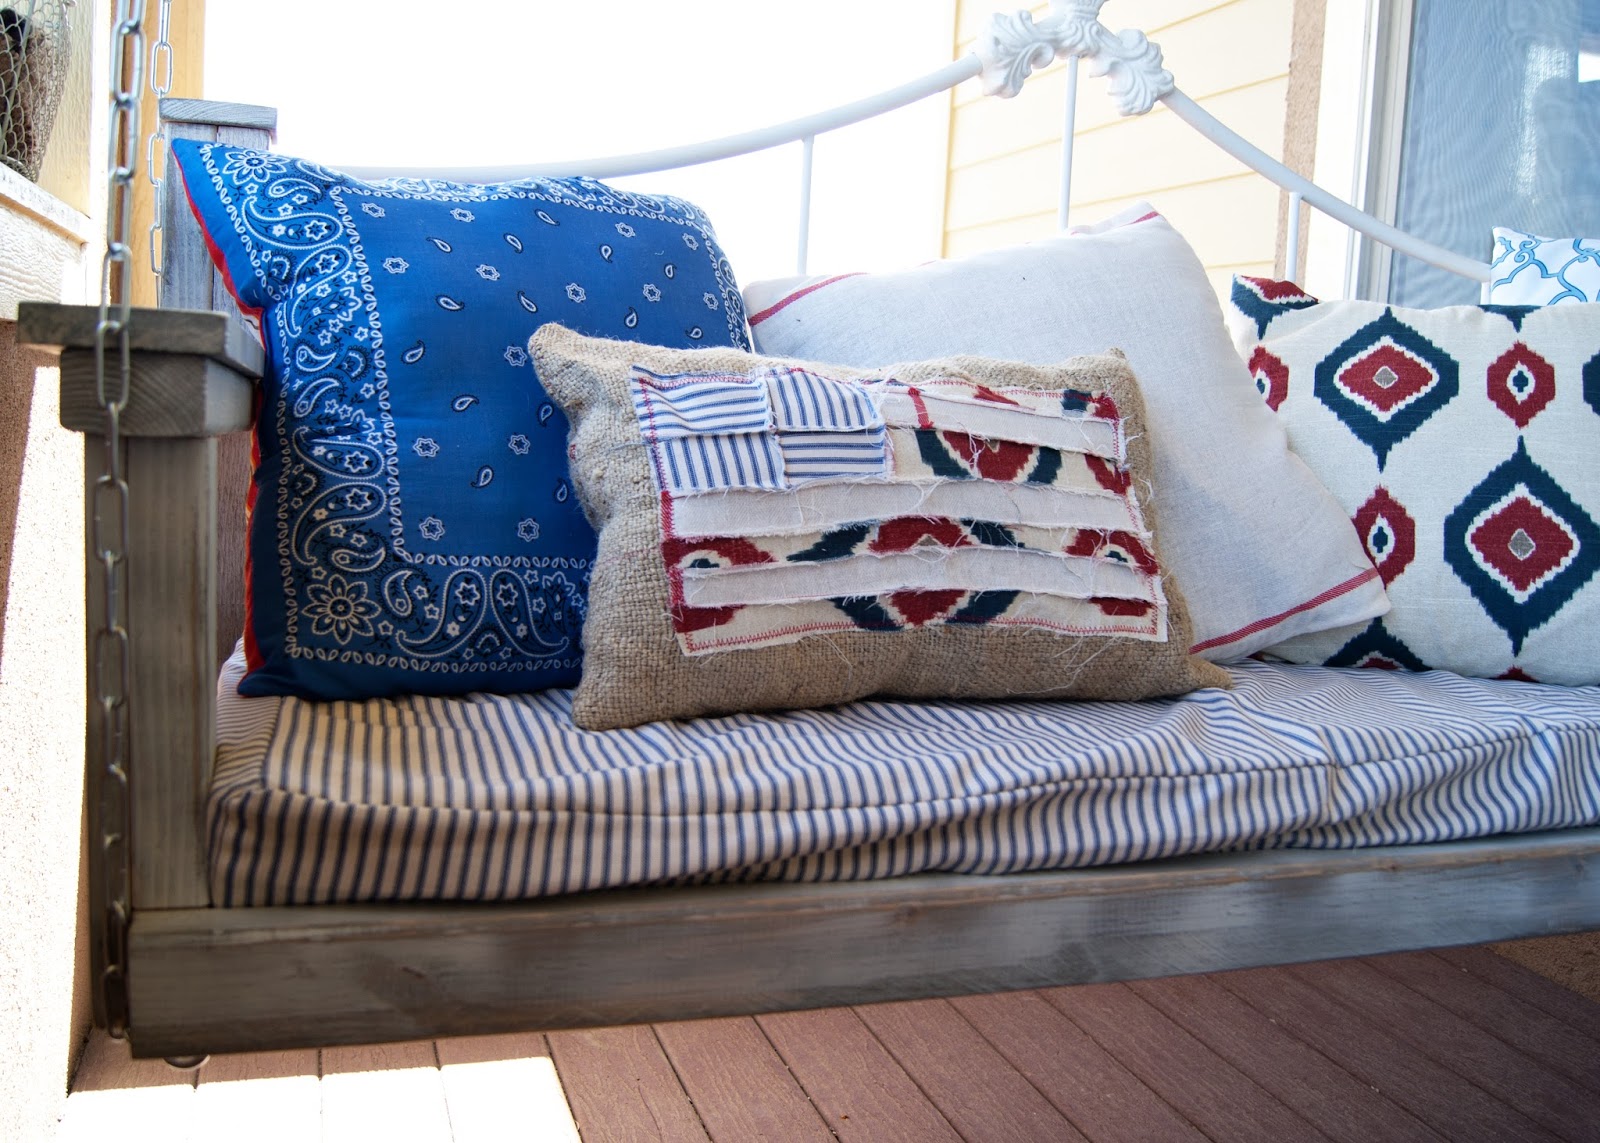 Scrappy Flag Pillow on porch swing